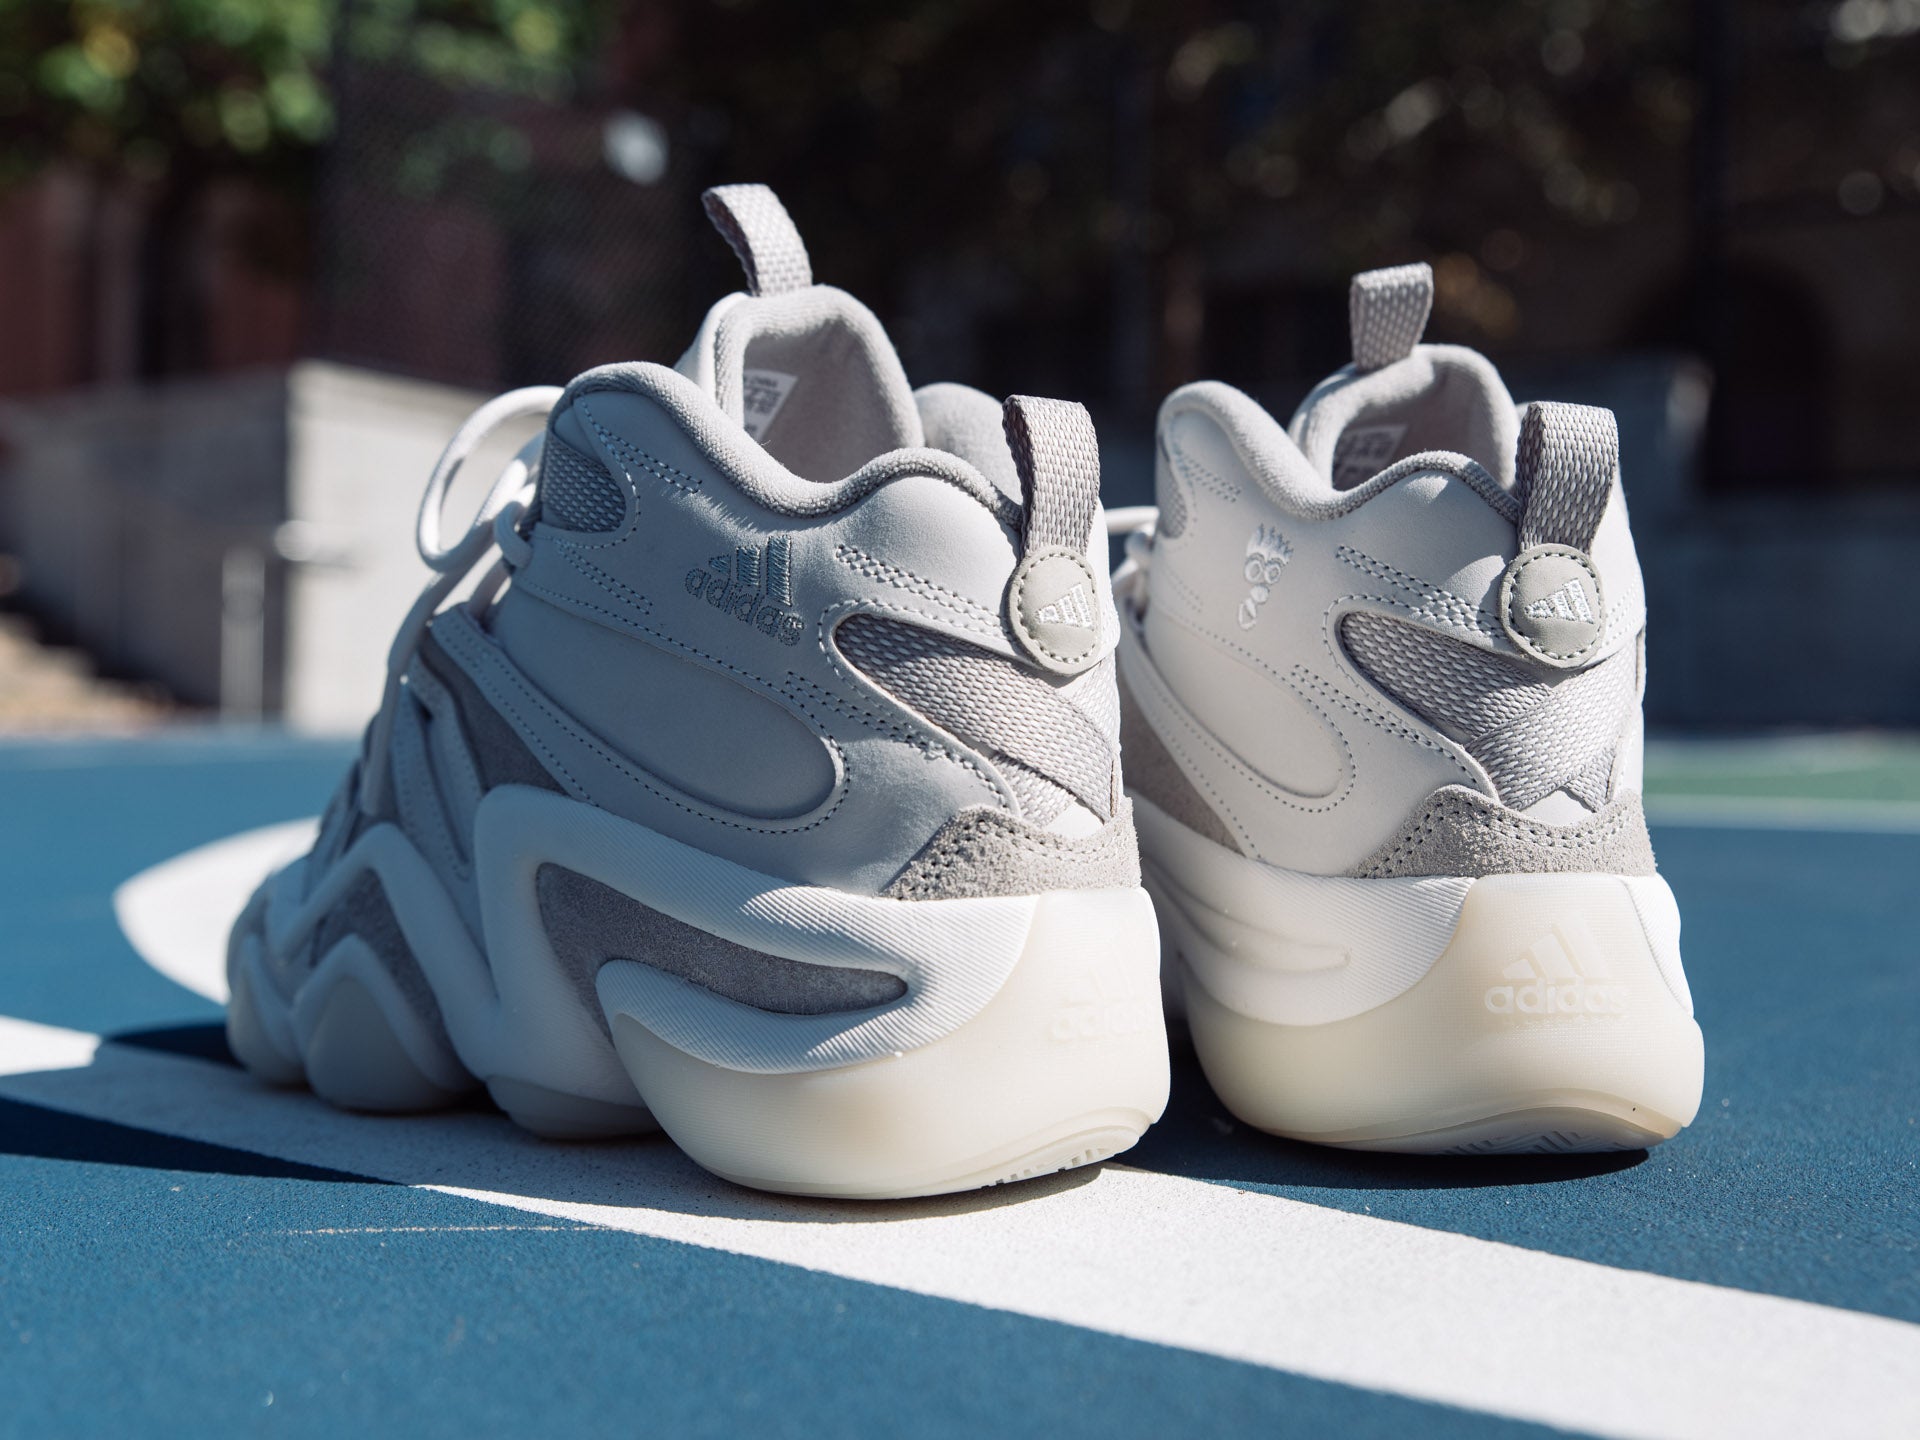 The adidas Crazy 8 Off White Sesame Releases October 1 - Sneaker News